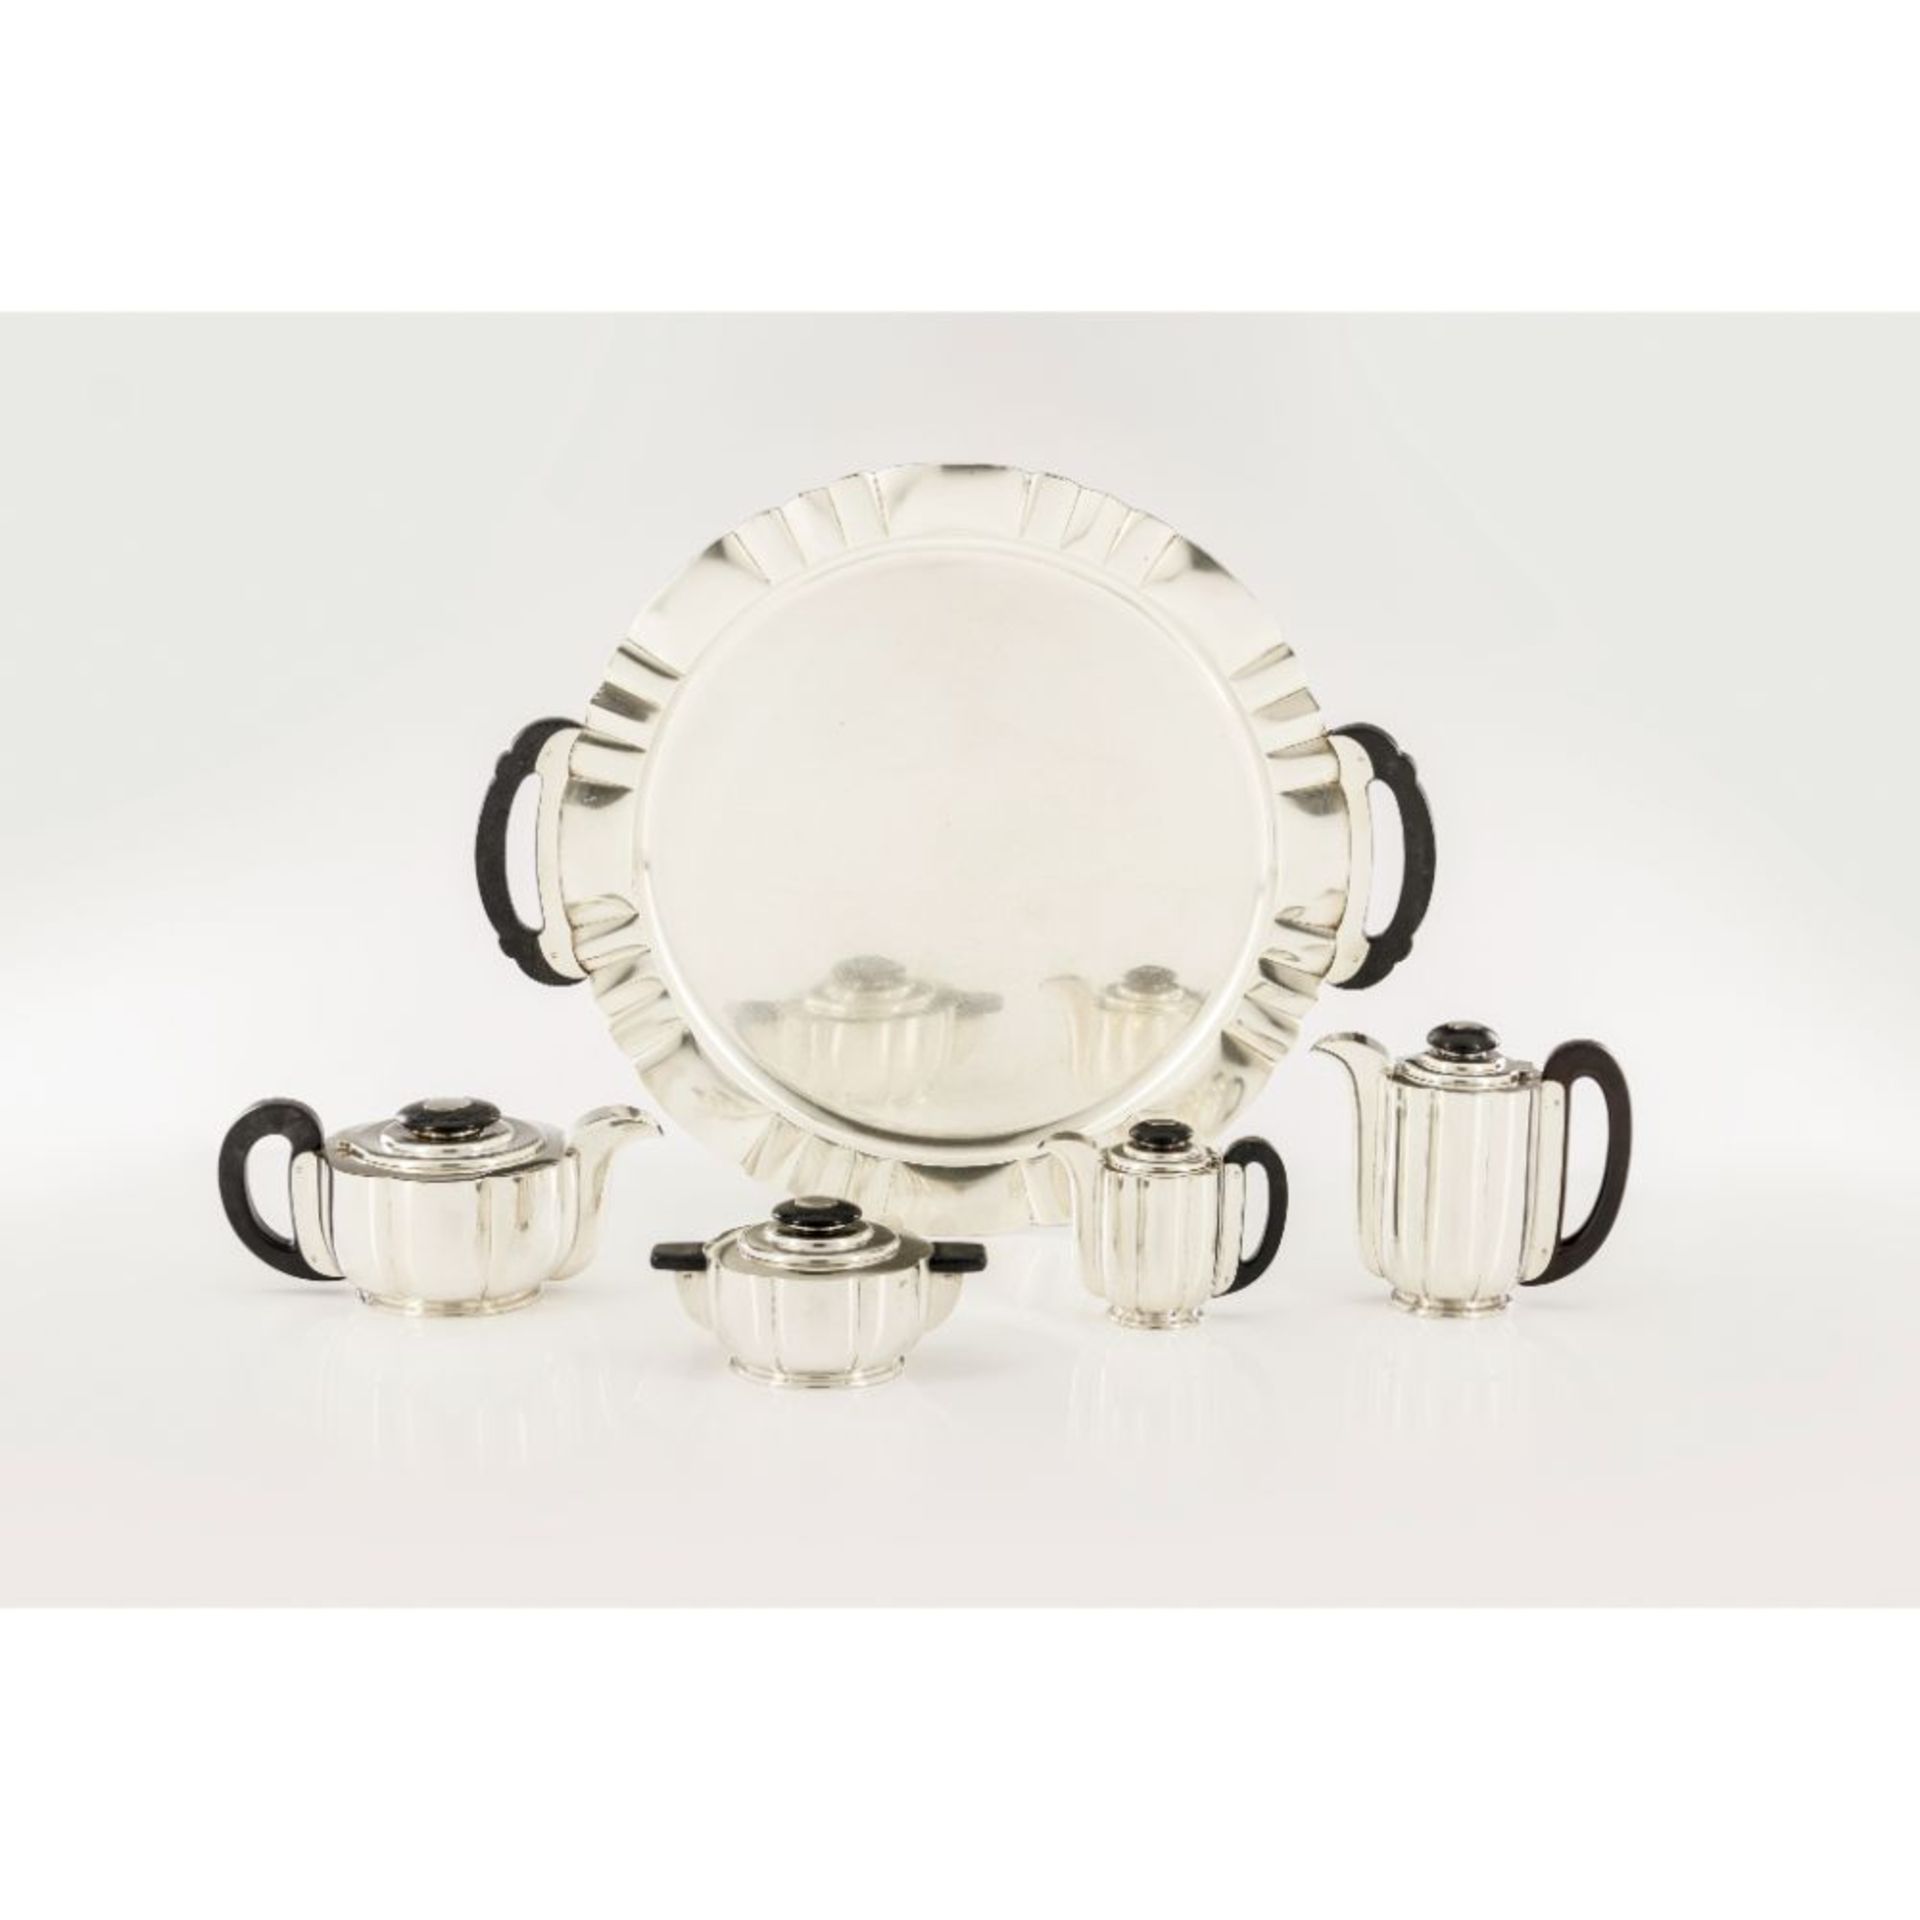 An Art Deco tea and coffee set with tray